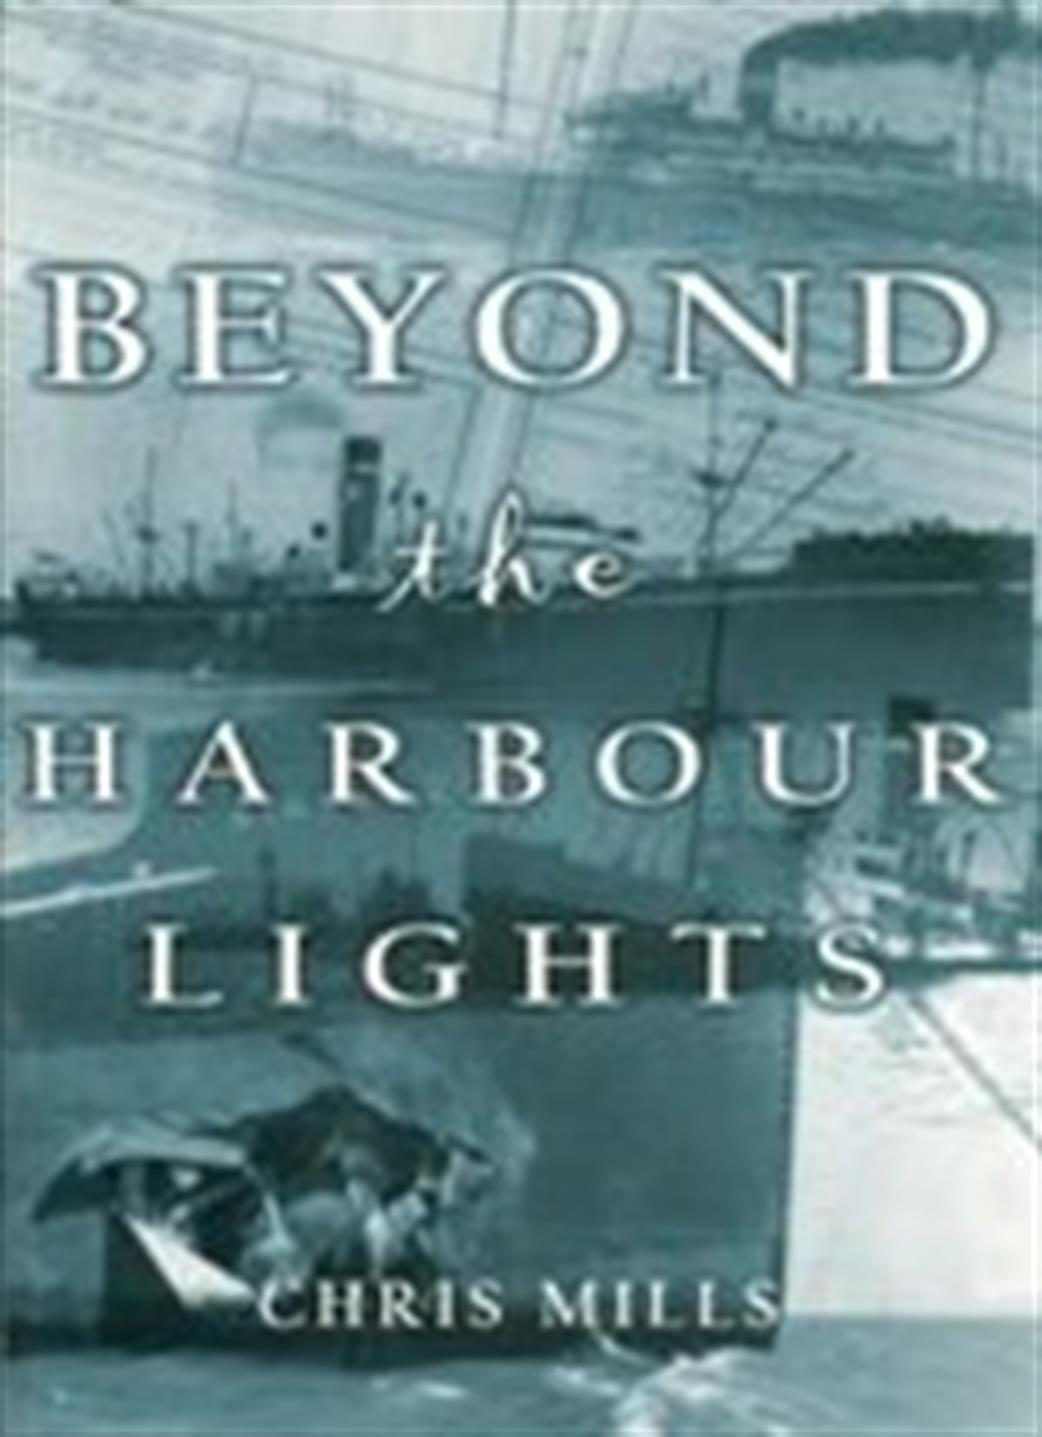 9781870325646 Whittles Publishing Beyond the Harbour Lights